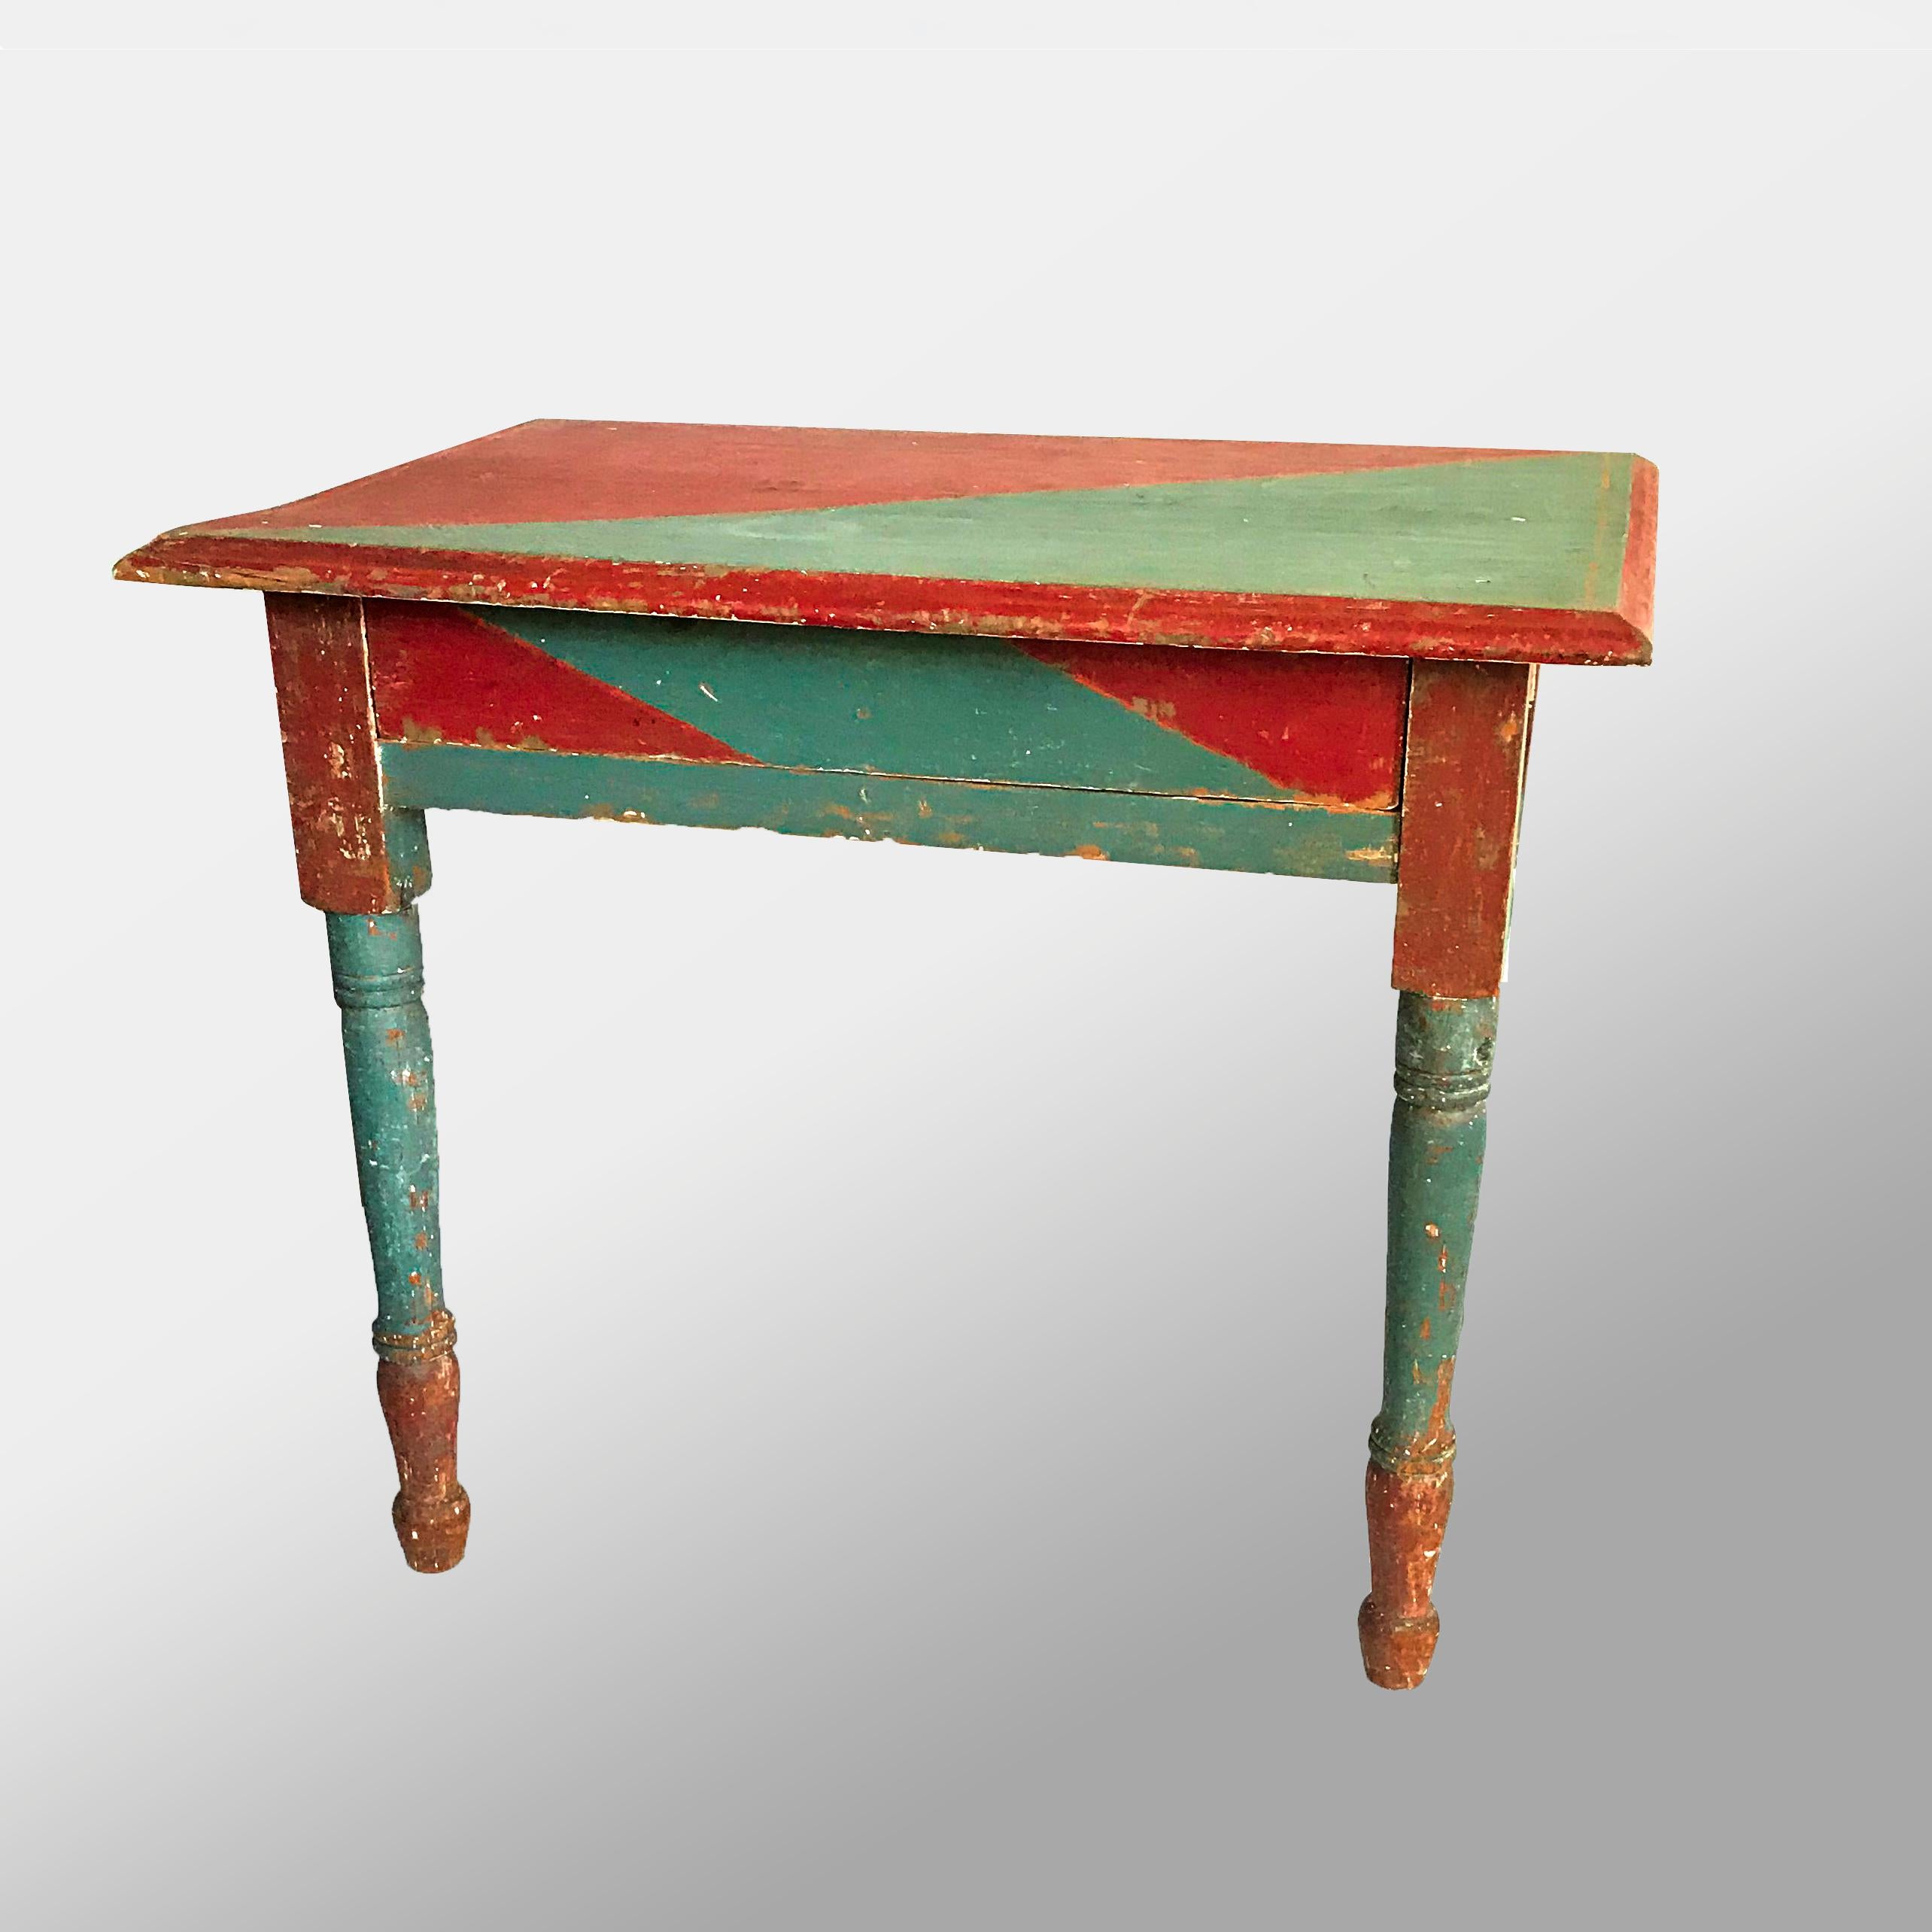 Hand-Painted Painted Child's Table